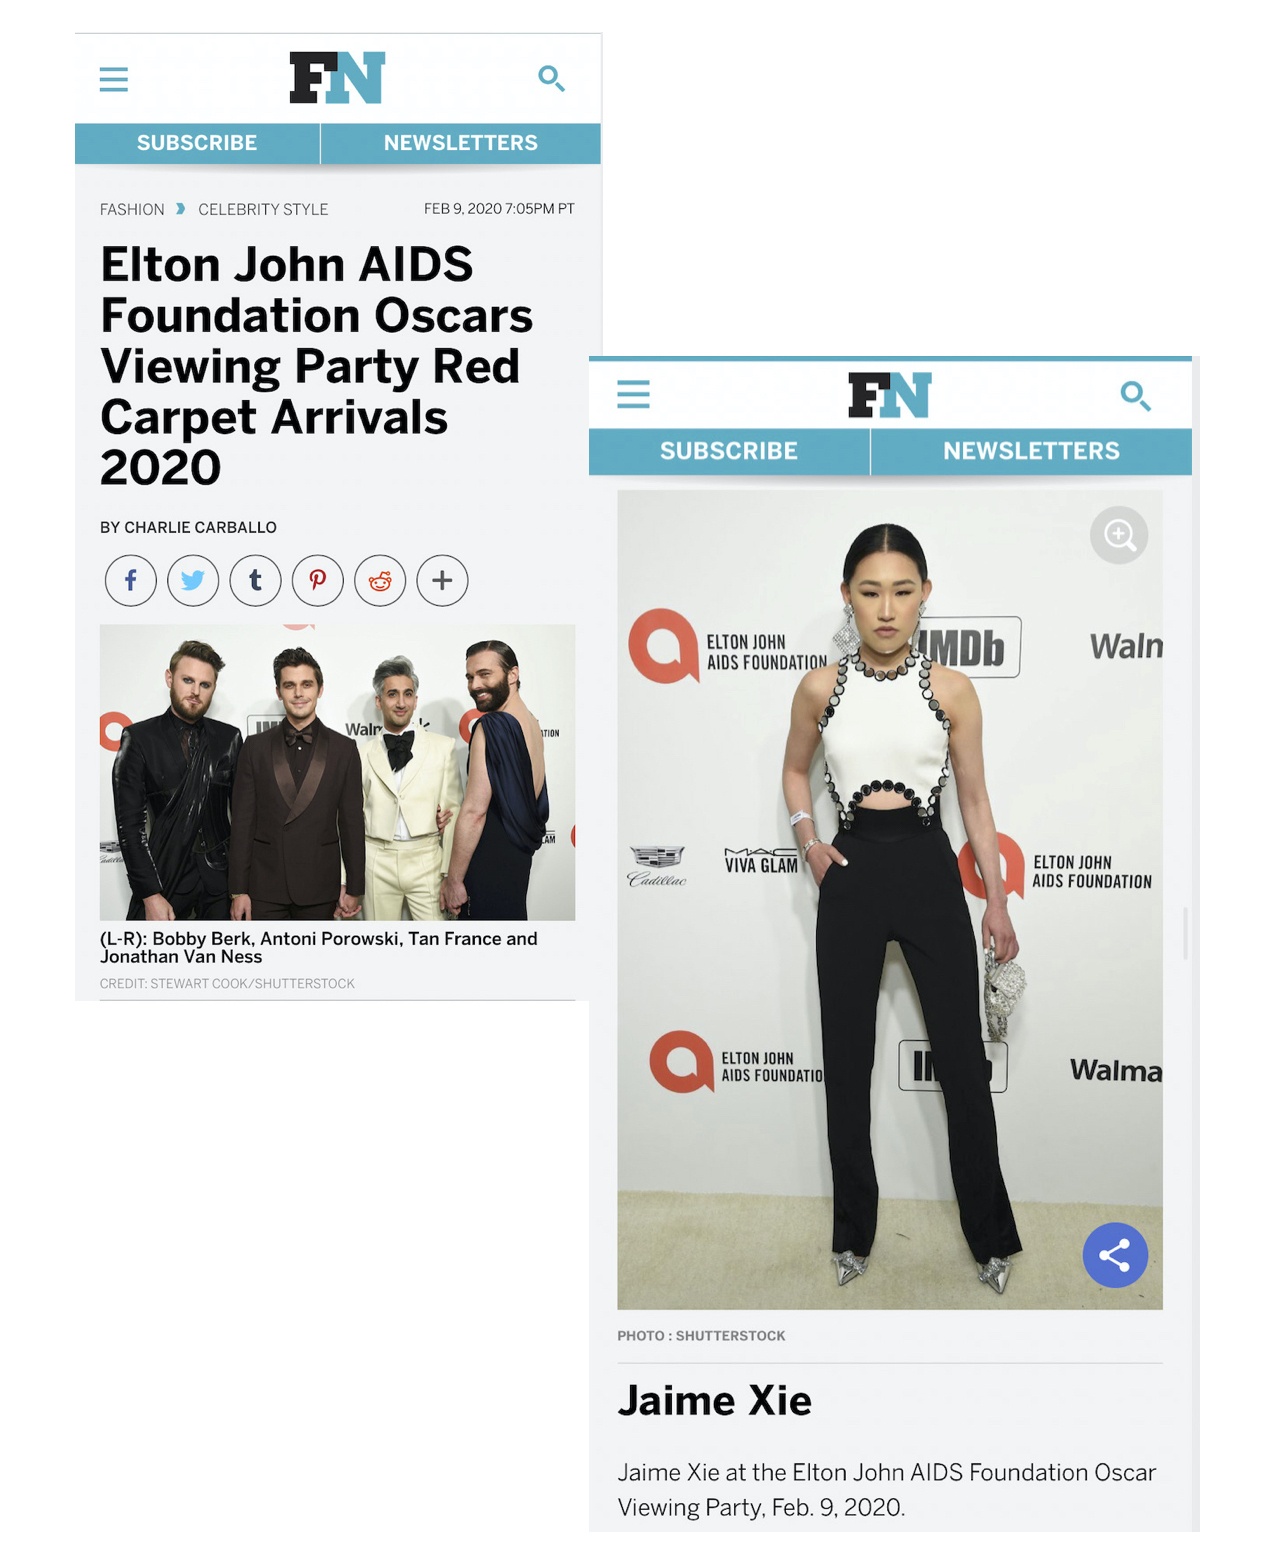 Footwear News: Elton John AIDS Foundation Oscars Viewing Party Red Carpet Arrivals 2020